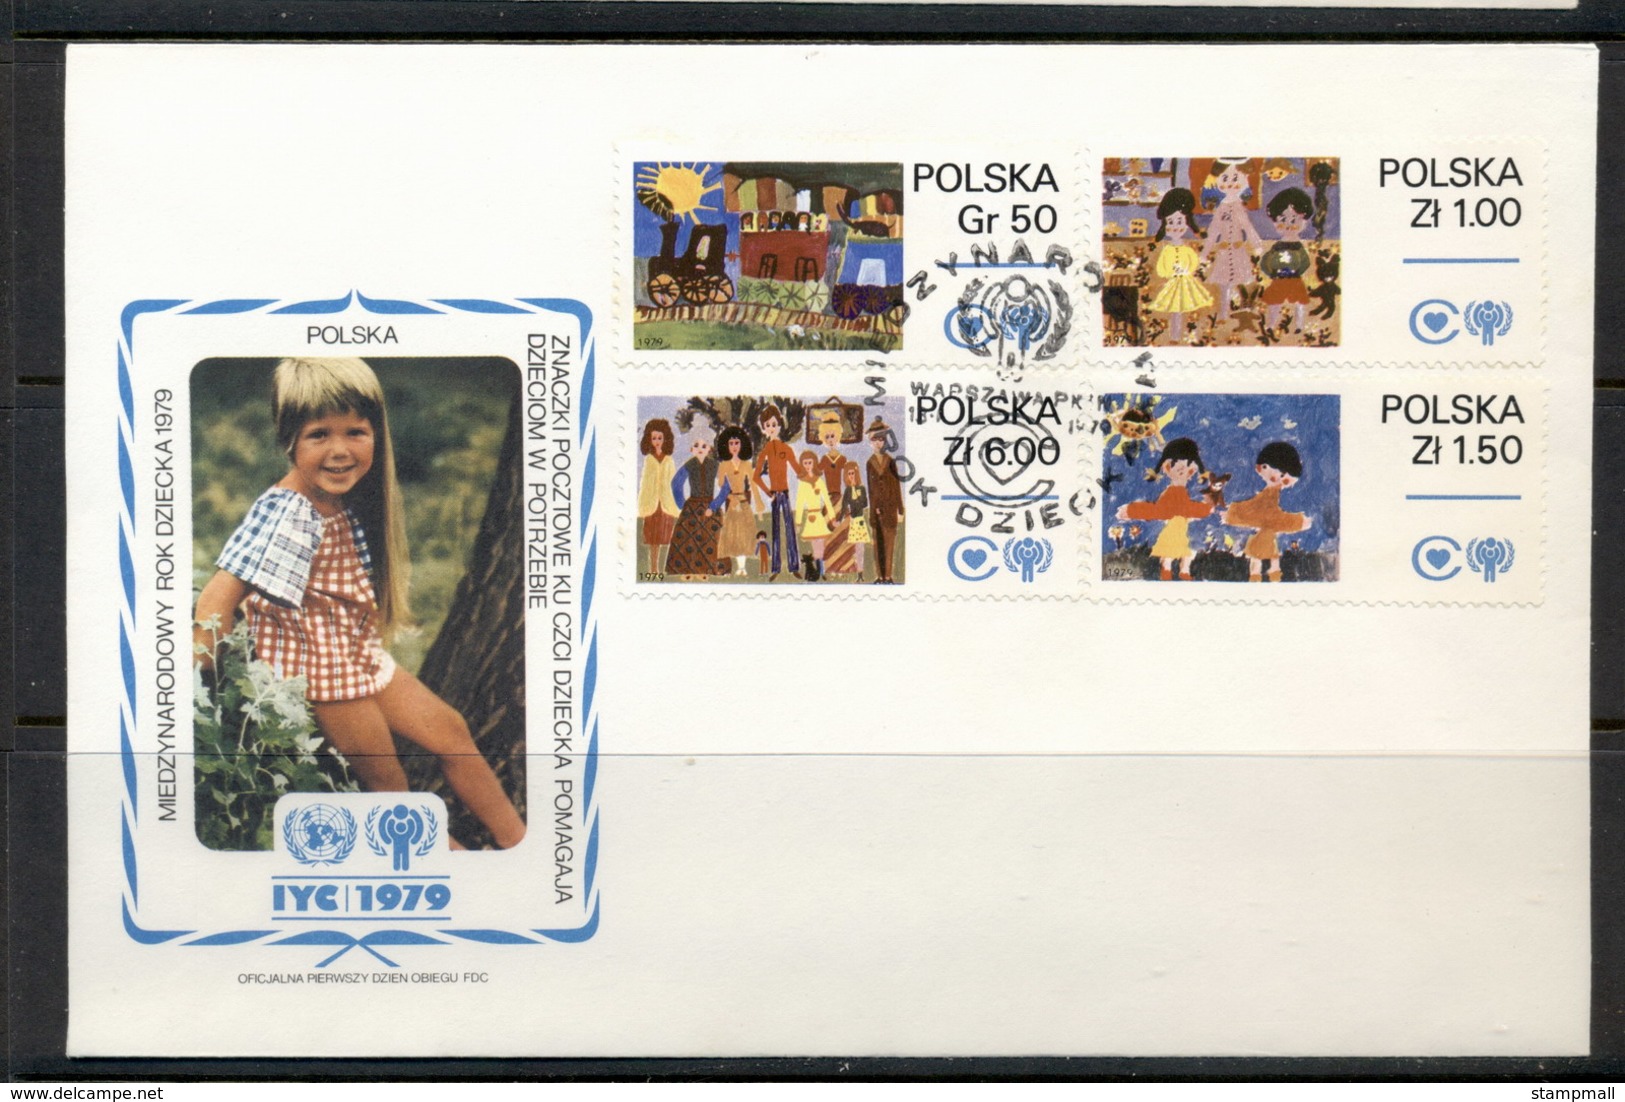 Poland 1979 IYC International Year Of The Child FDC - FDC